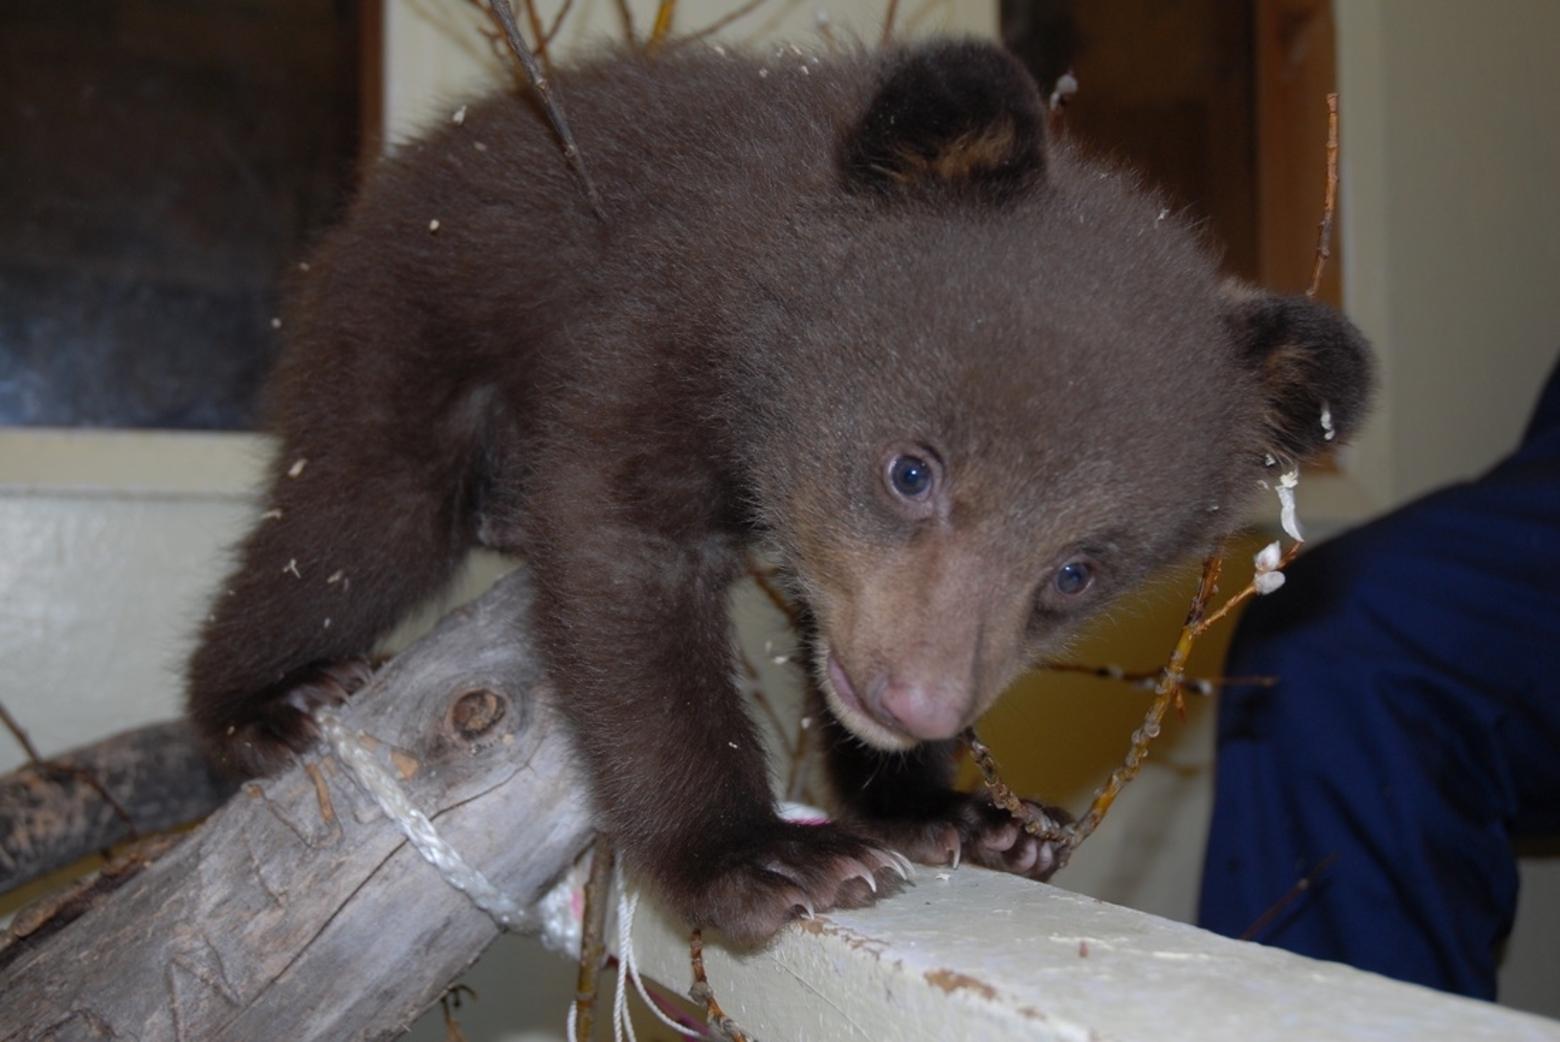 A newly-arrived orphaned black bear cub at the Cochrane Ecological Institute that will be rehabilitated for release back into the wild. Photo courtesy Cochrane Ecological Institute.